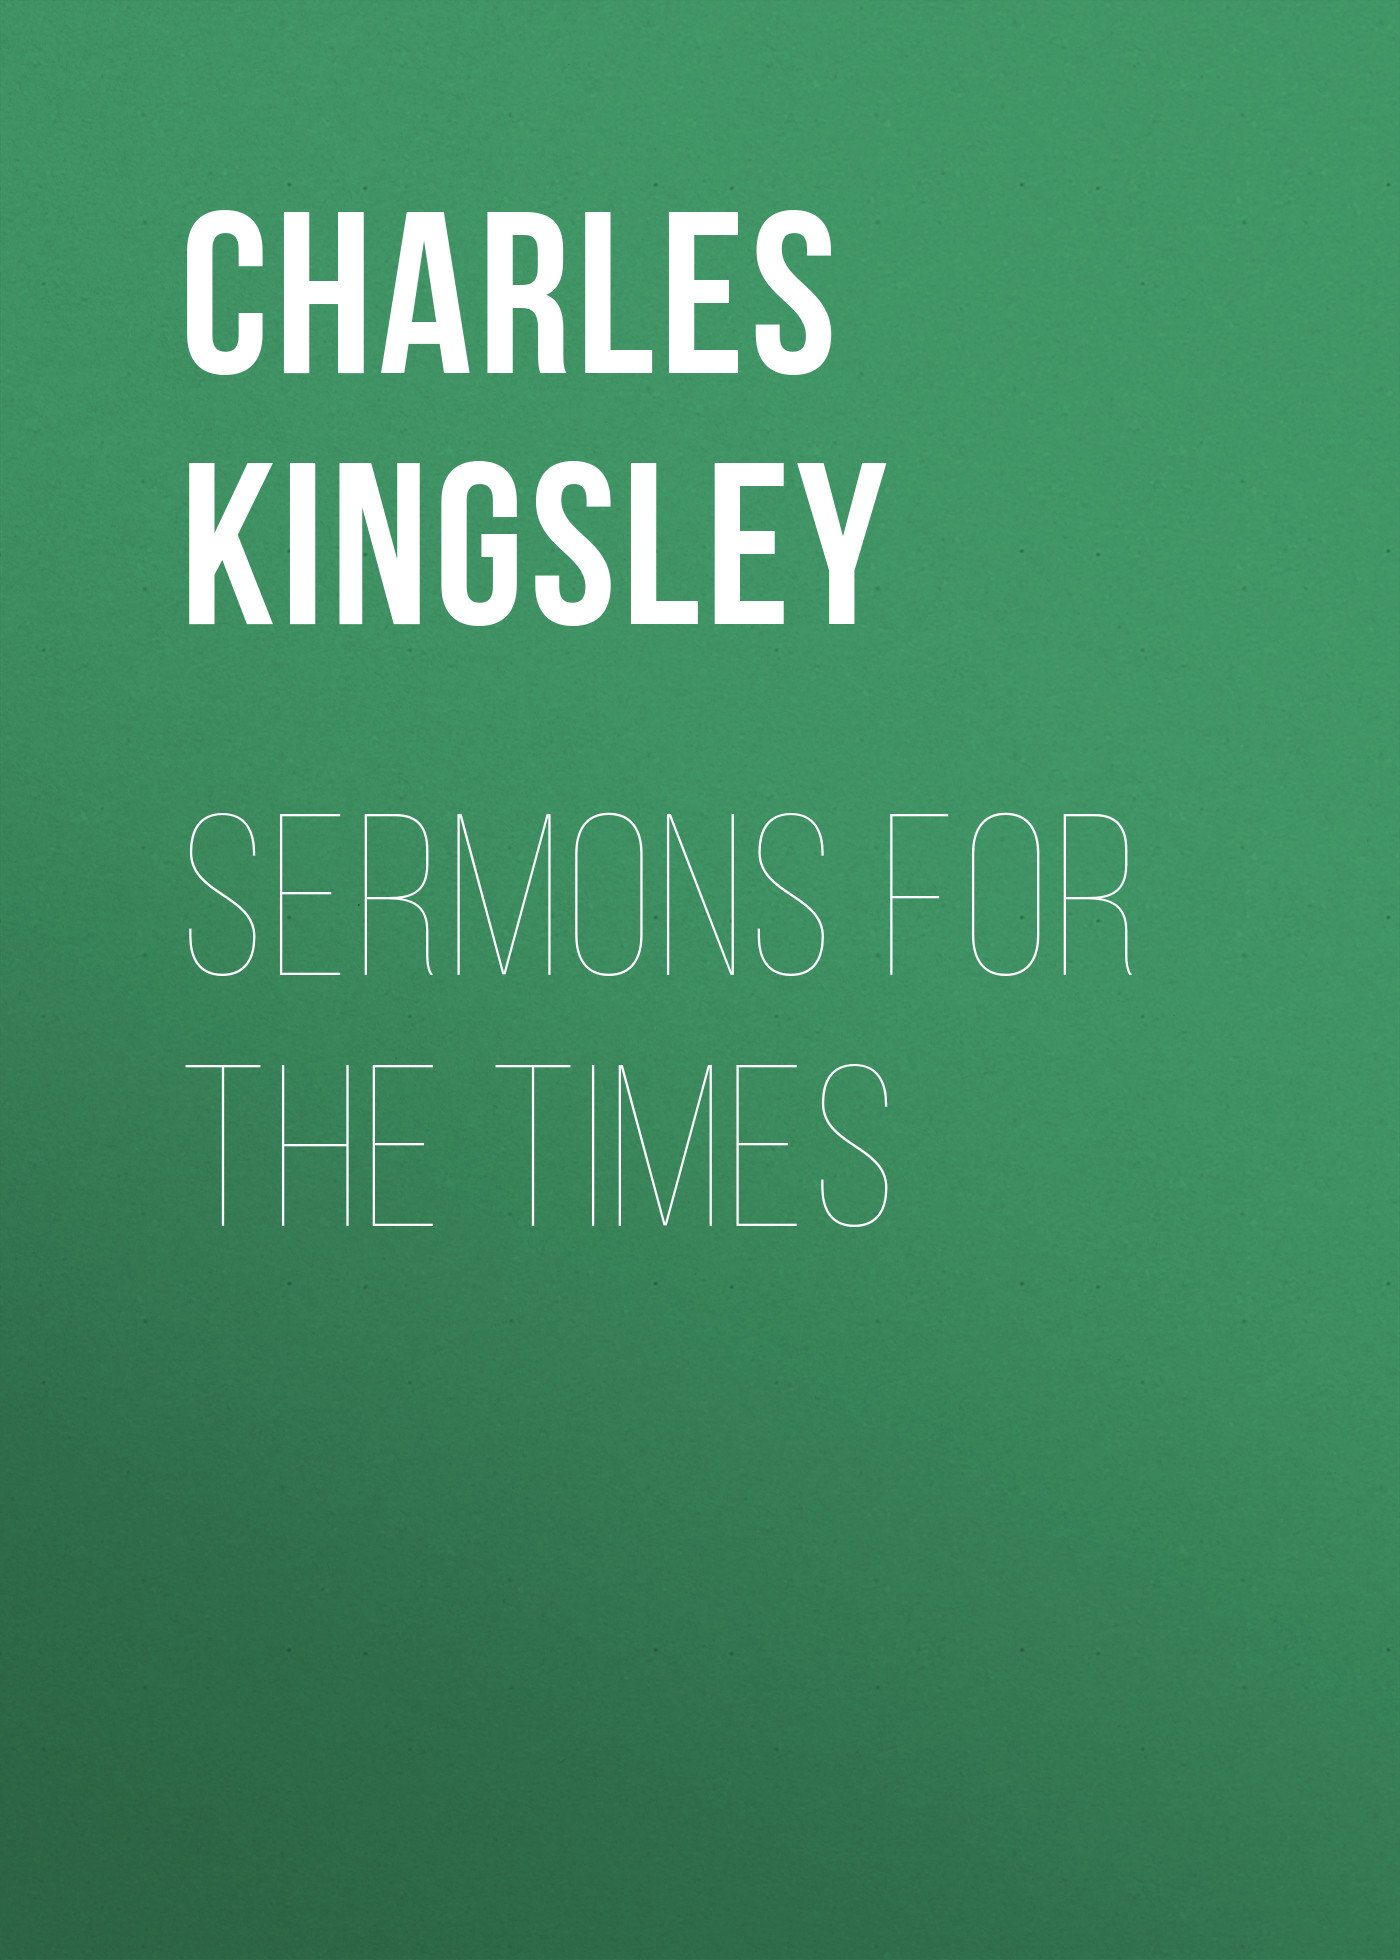 Sermons for the Times